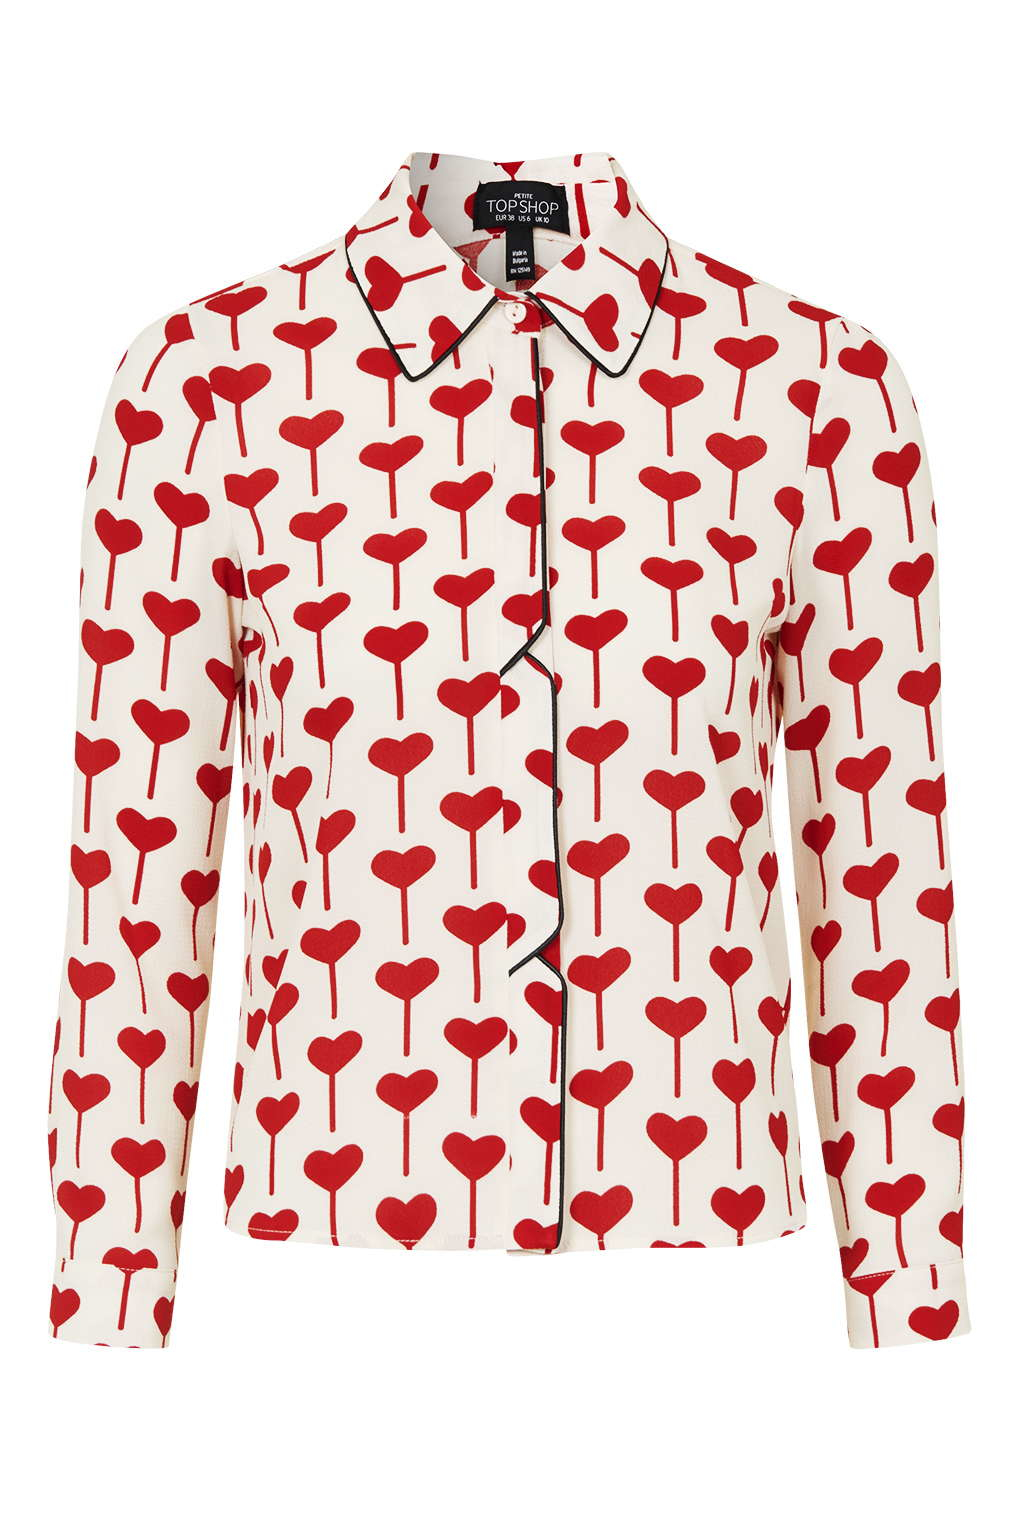 Topshop Petite Heart Print Shirt in Red | Lyst